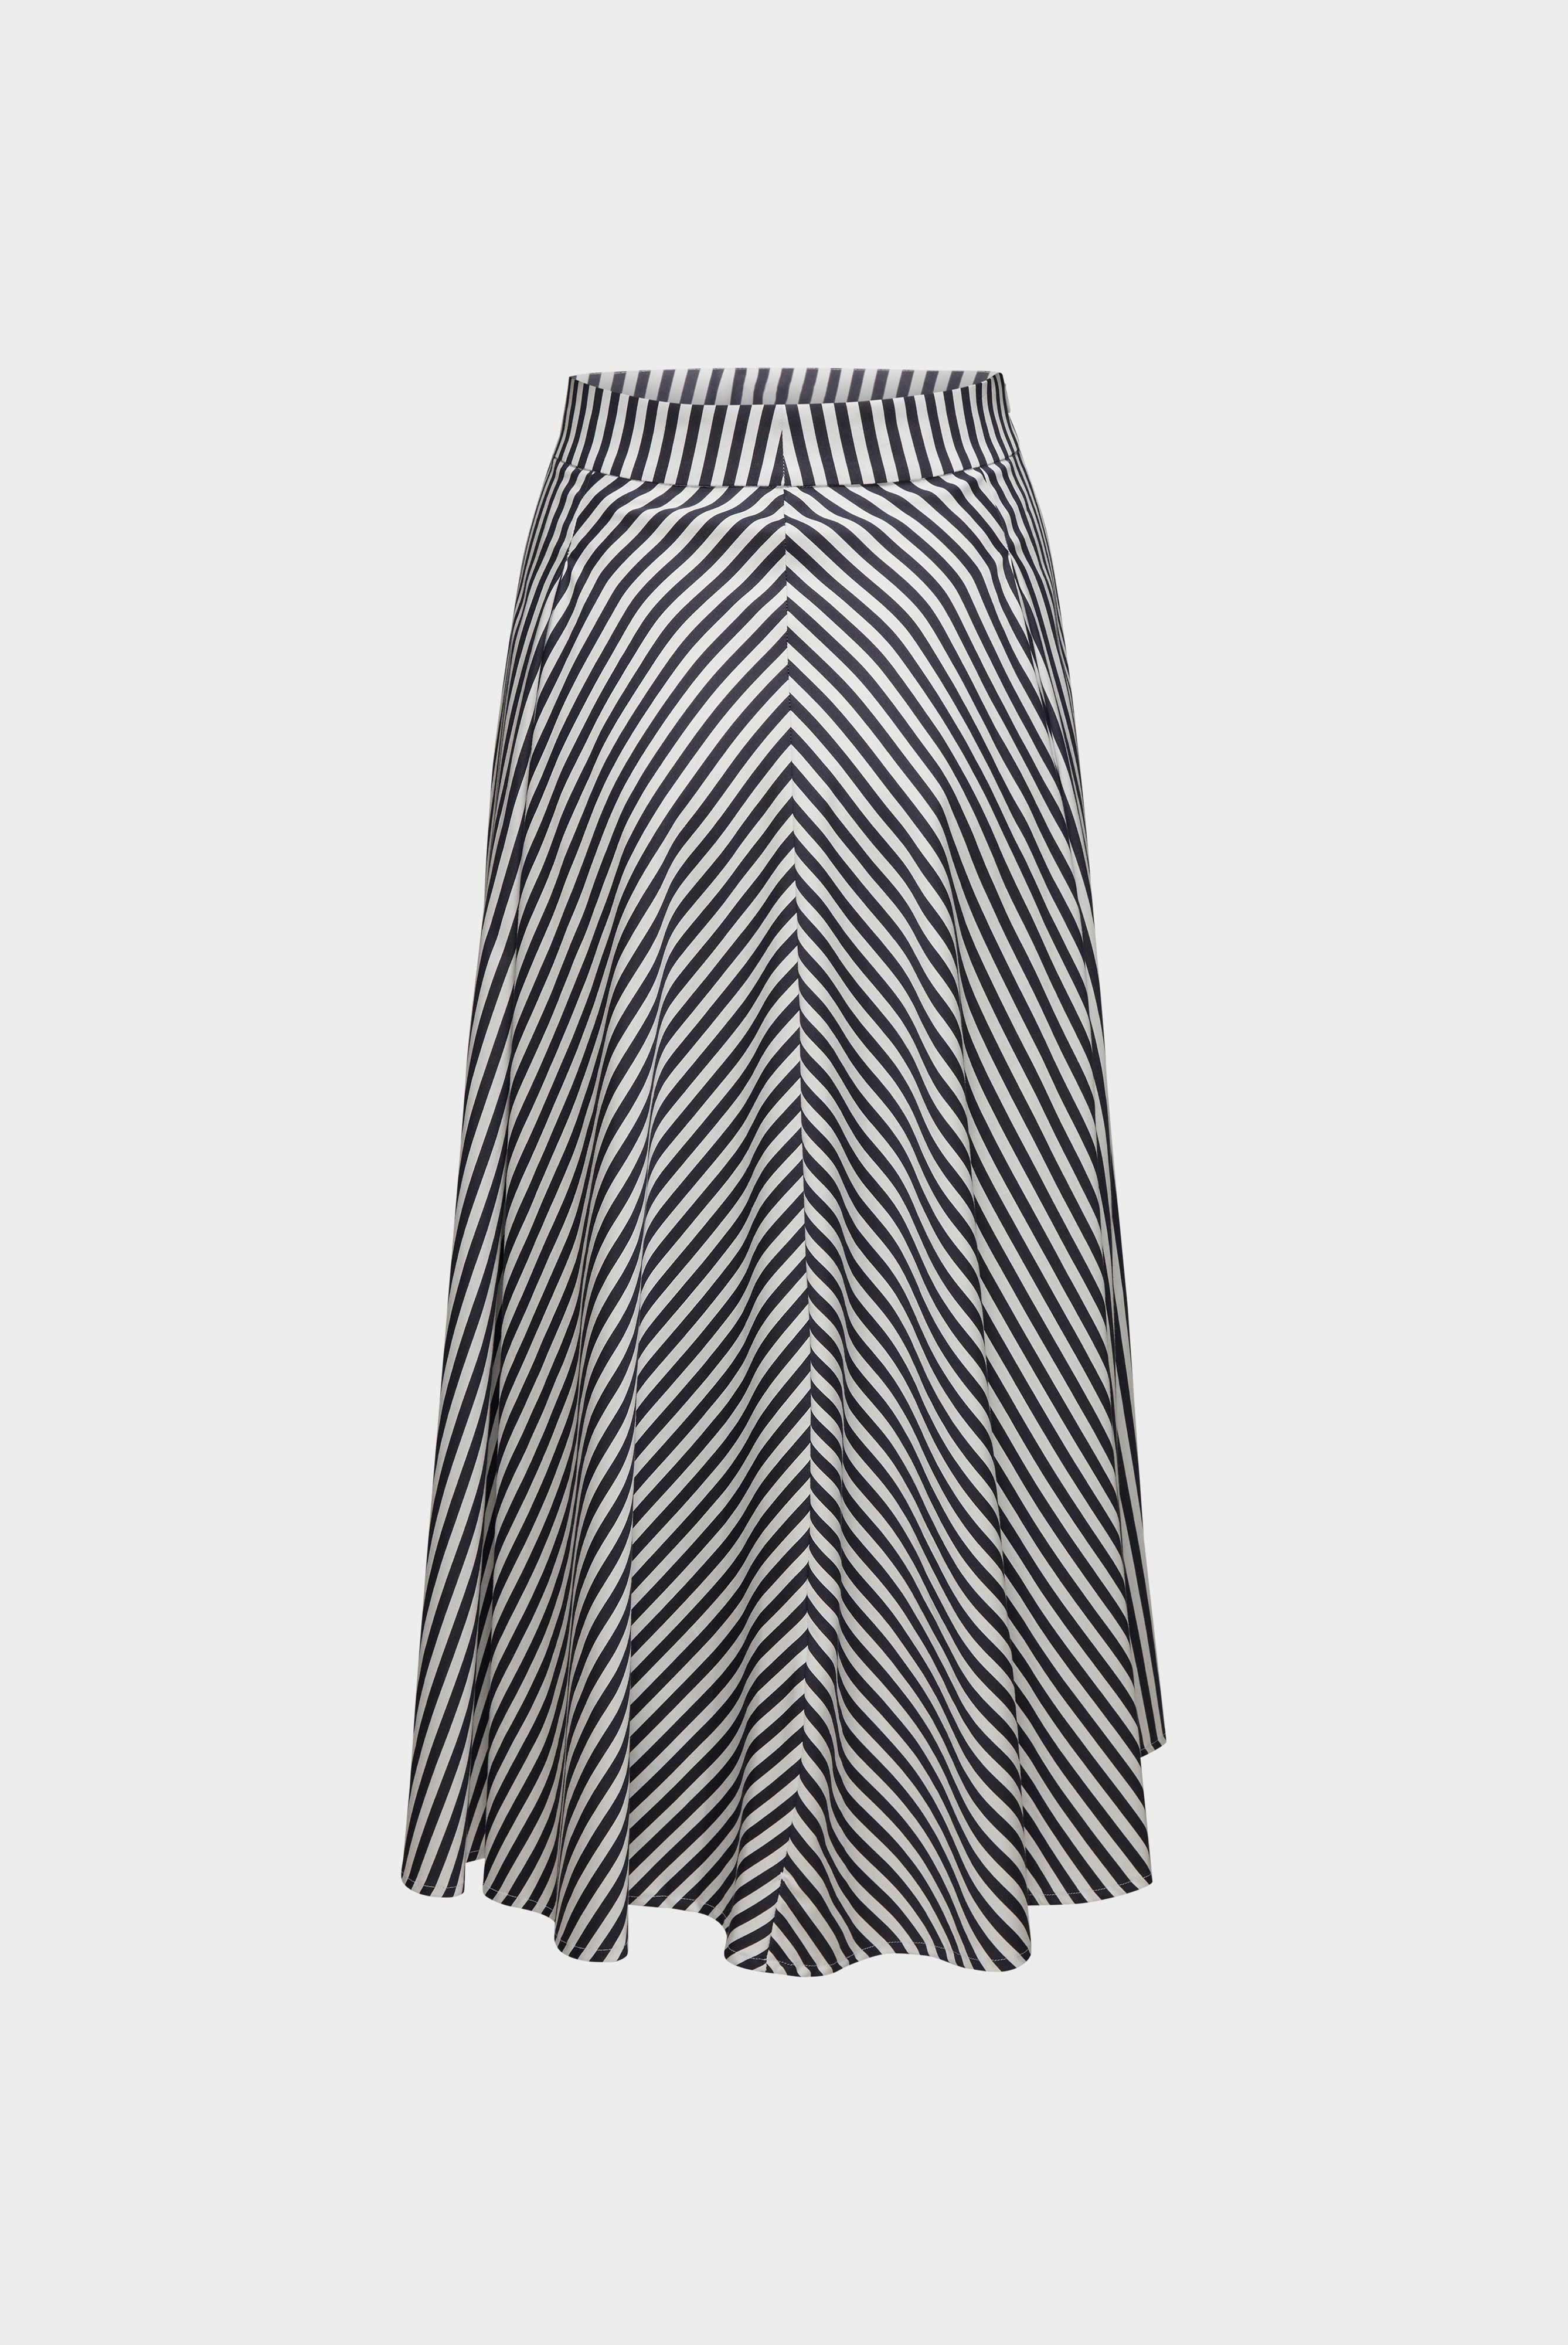 Dresses & Skirts+Skirt in Cotton Stretch with Stripe Pattern+05.659A..171959.790.34